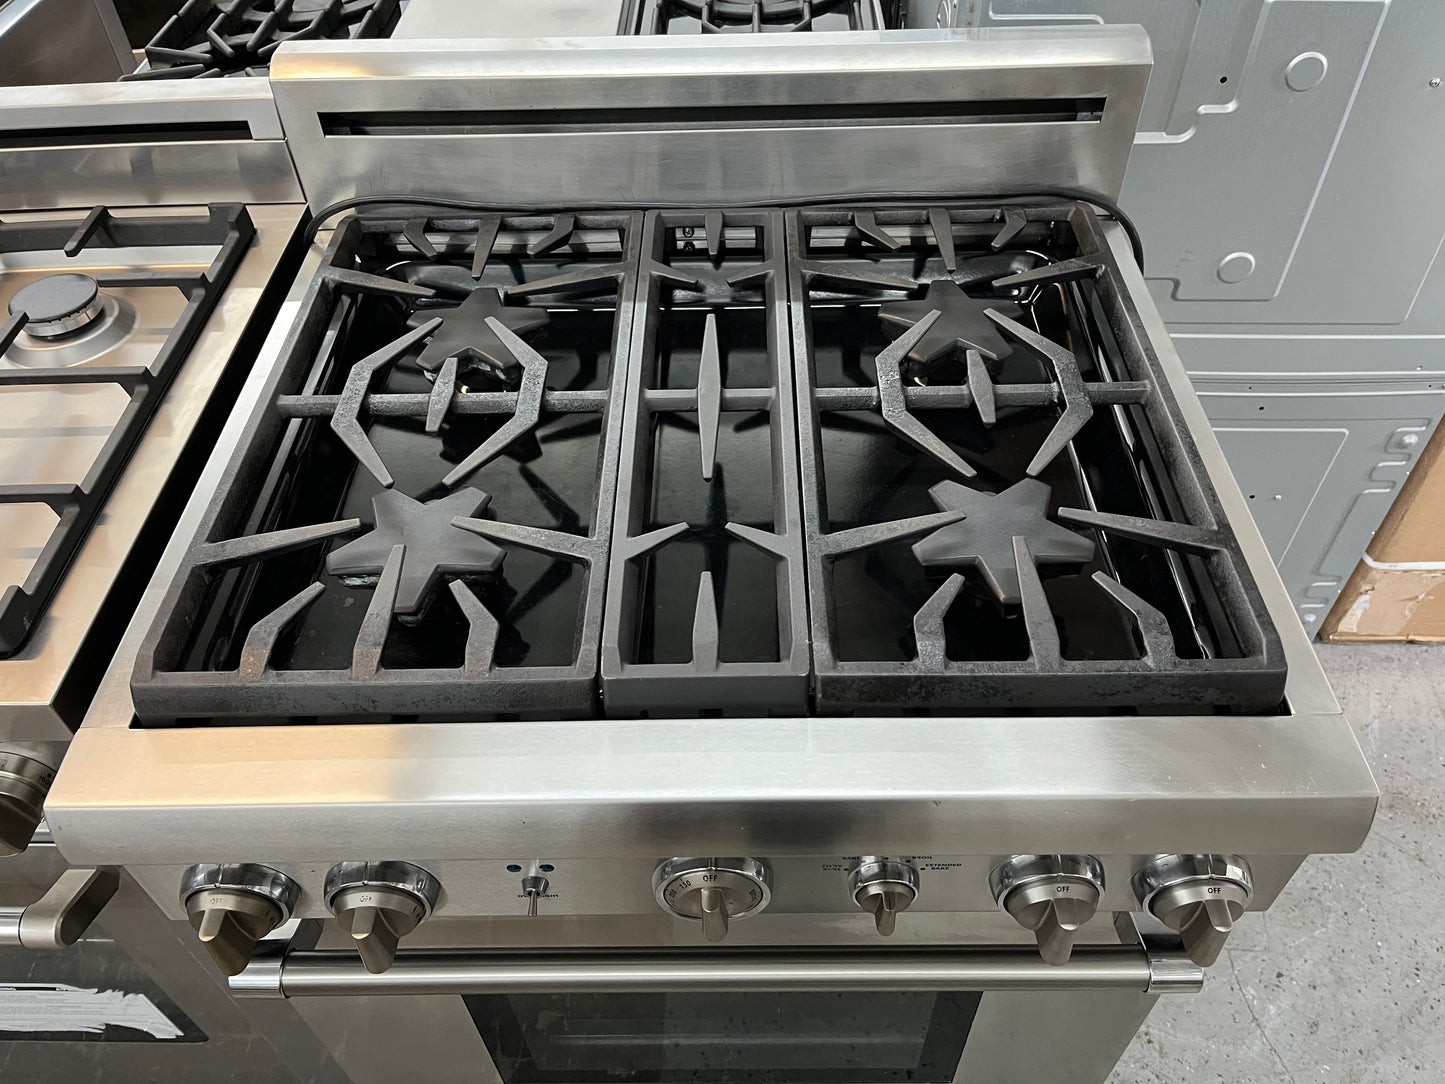 Thermador 30 Inch Pro-Style Gas Range,PRG304GH,Convection Oven,4 Sealed Burners,Continuous Grates,Extralow Simmer Feature,Telescopic Rack,Halogen Lightning,Sabbath mode,Natural Gas, Stainless Steel,Pro Harmony,888063